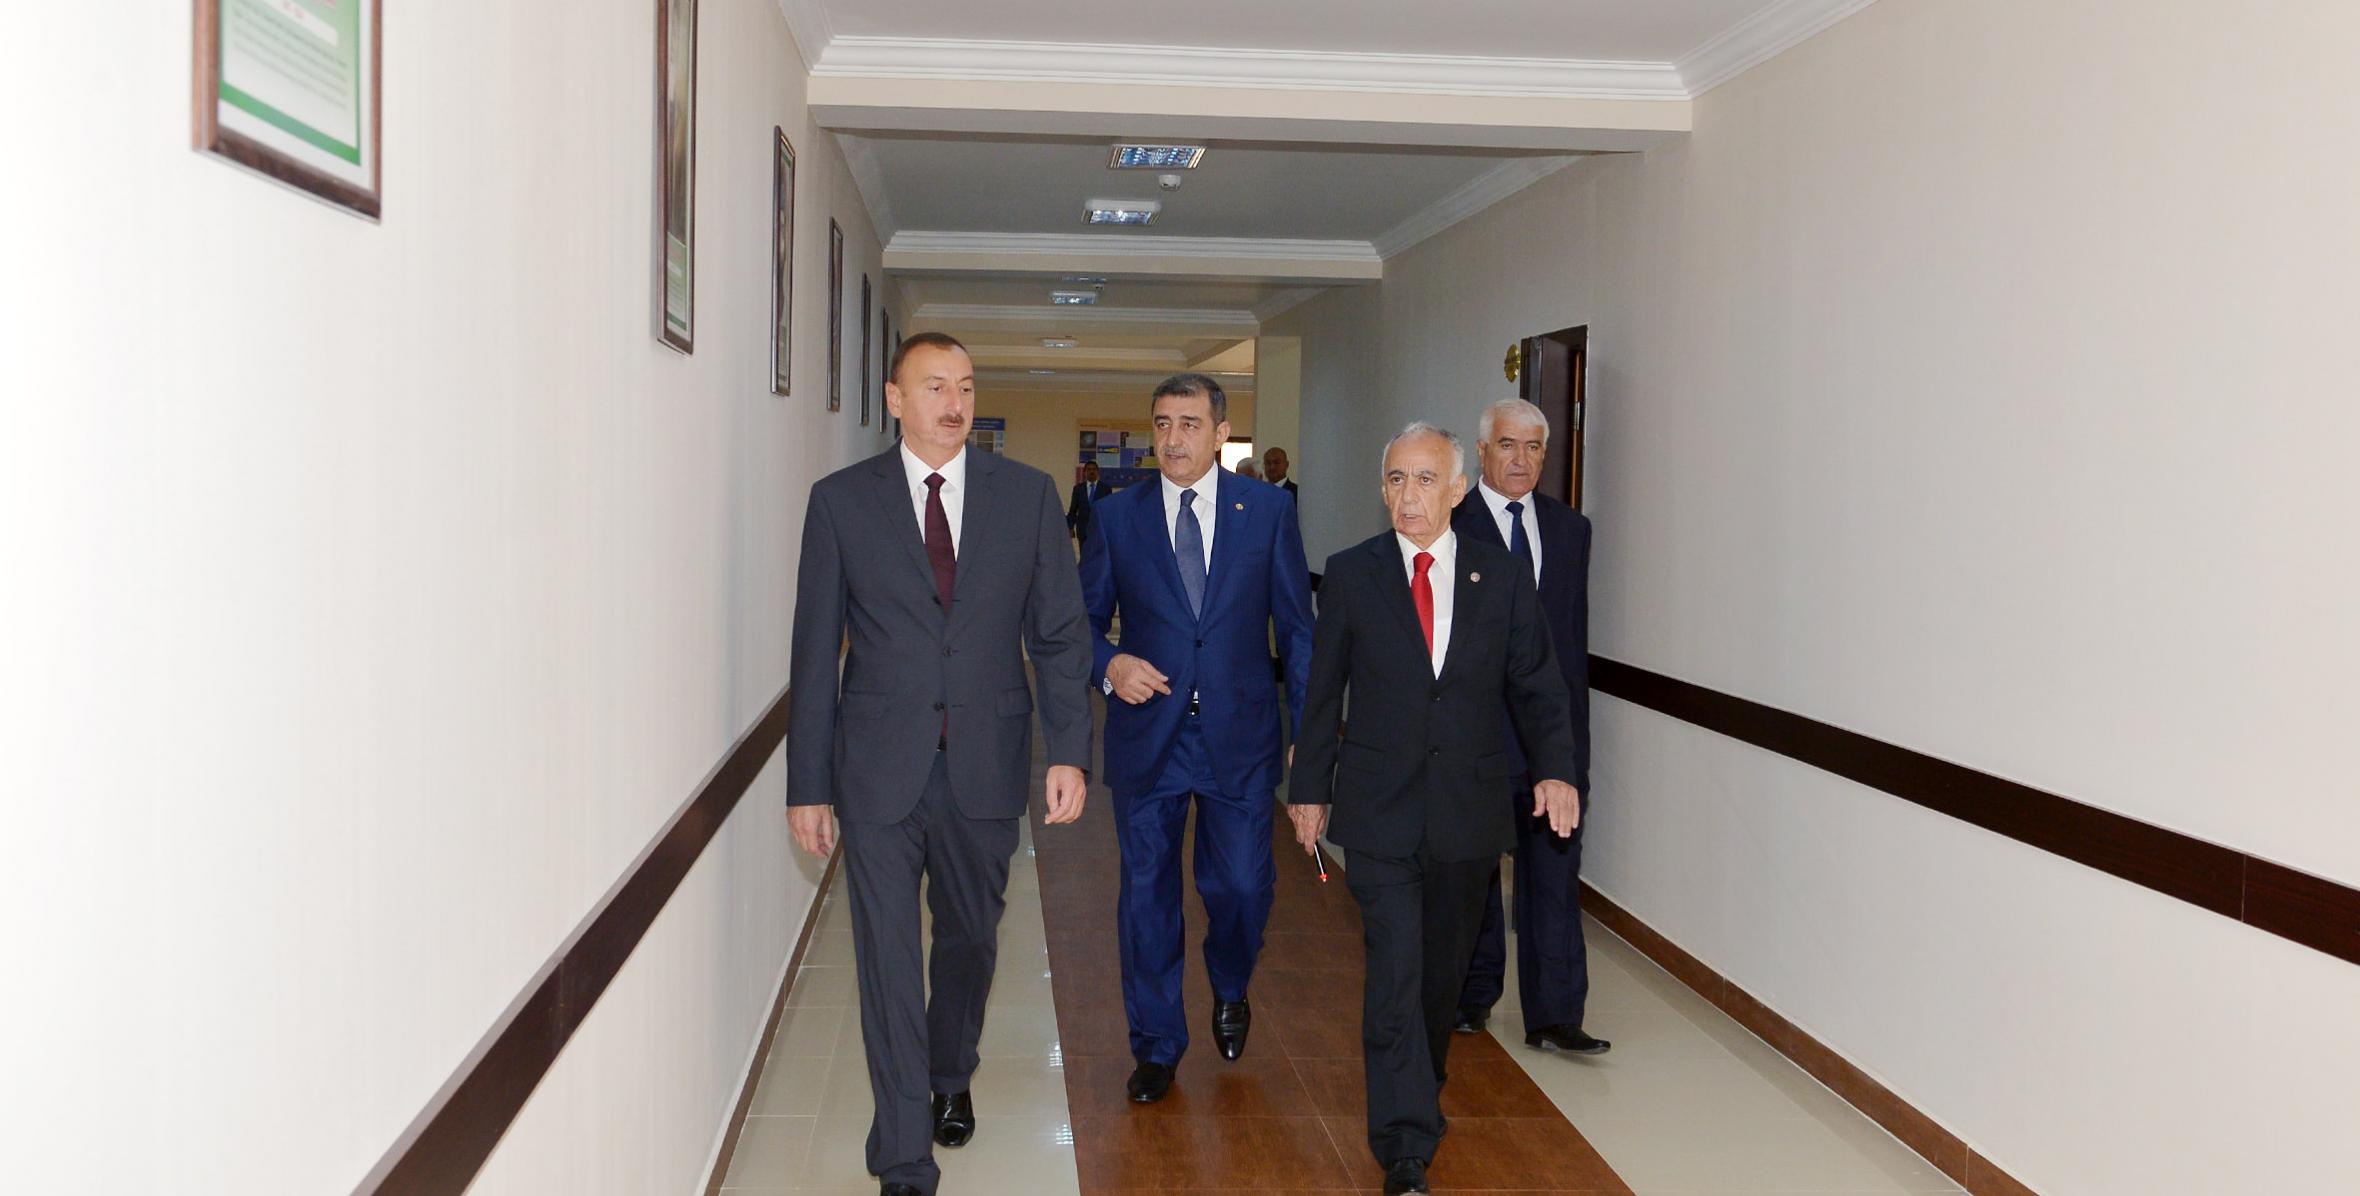 Ilham Aliyev attended the opening of a new building of school No. 84 in Baku